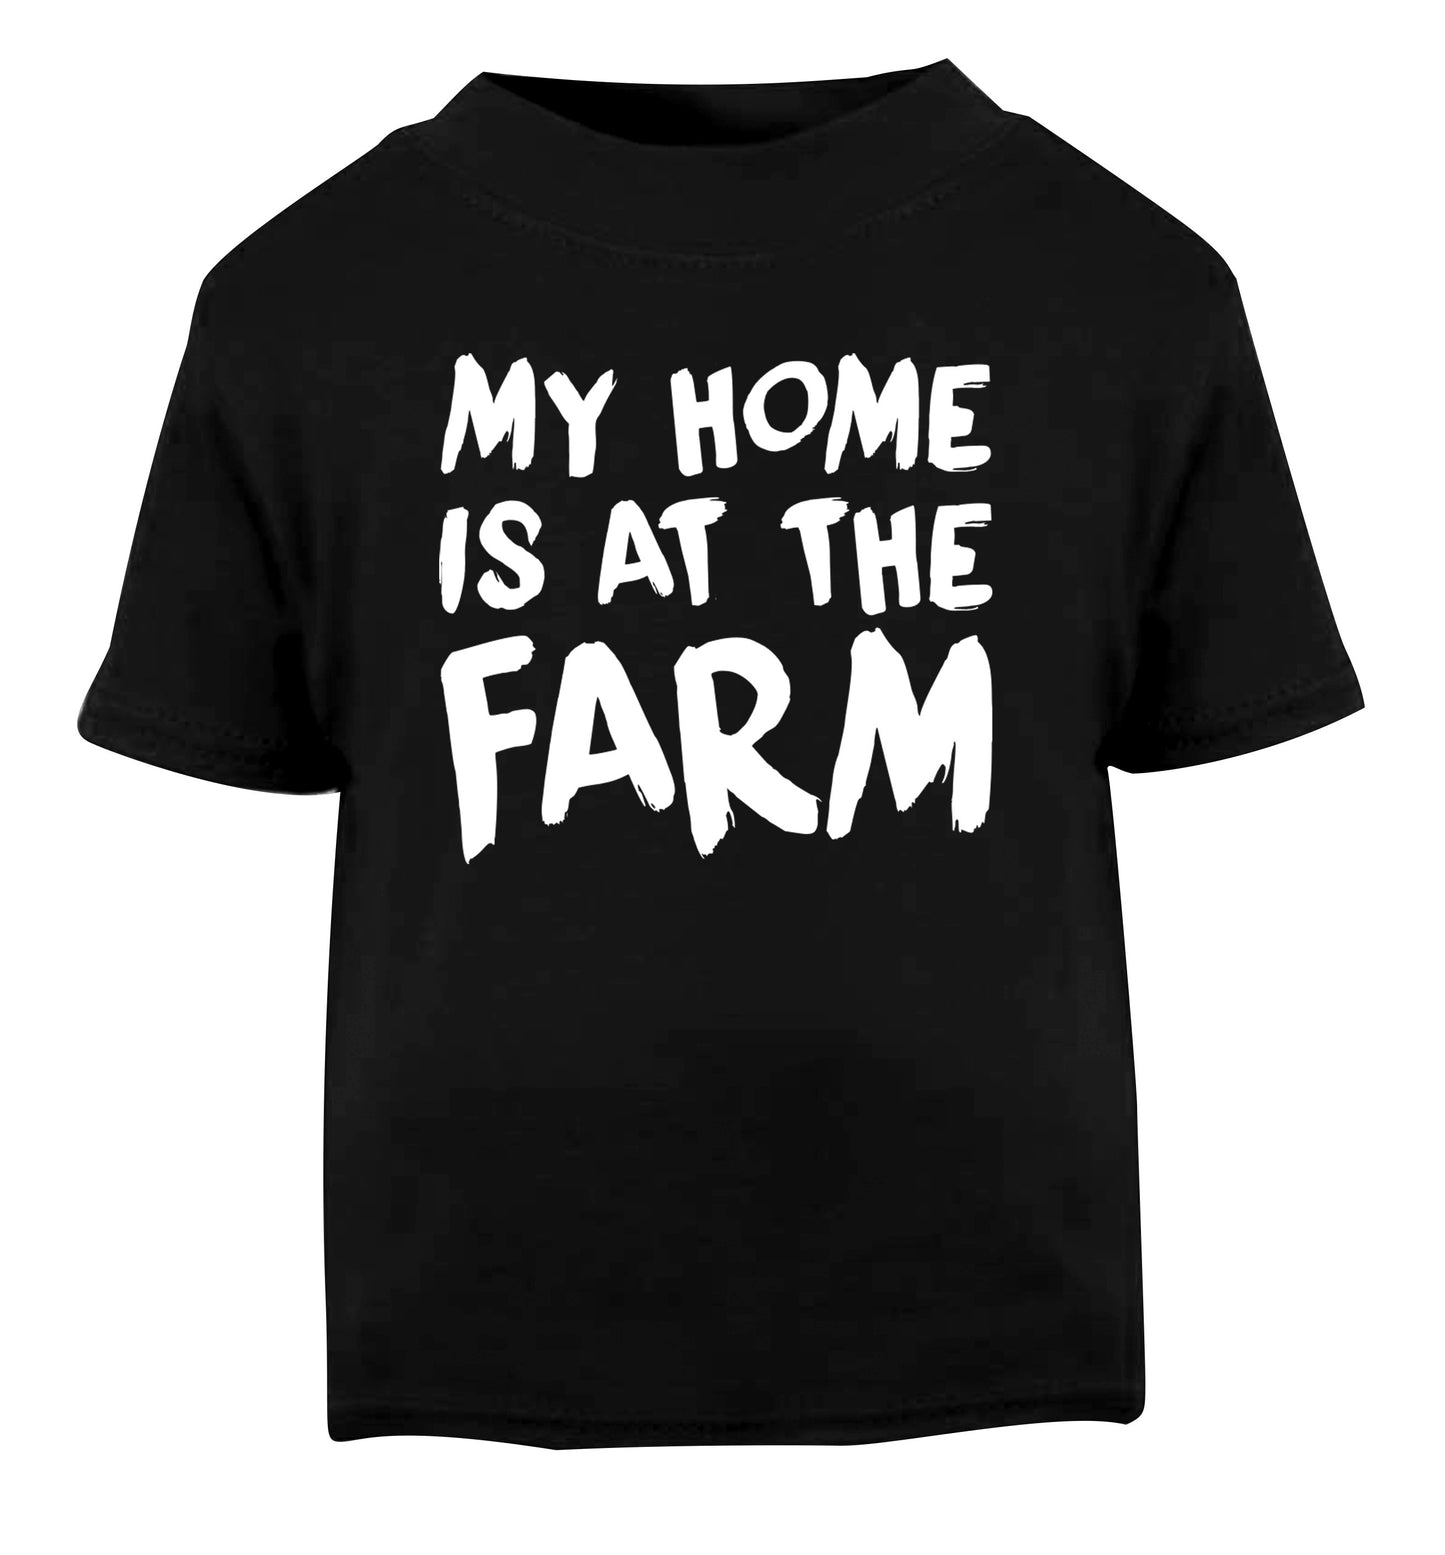 My home is at the farm Black Baby Toddler Tshirt 2 years